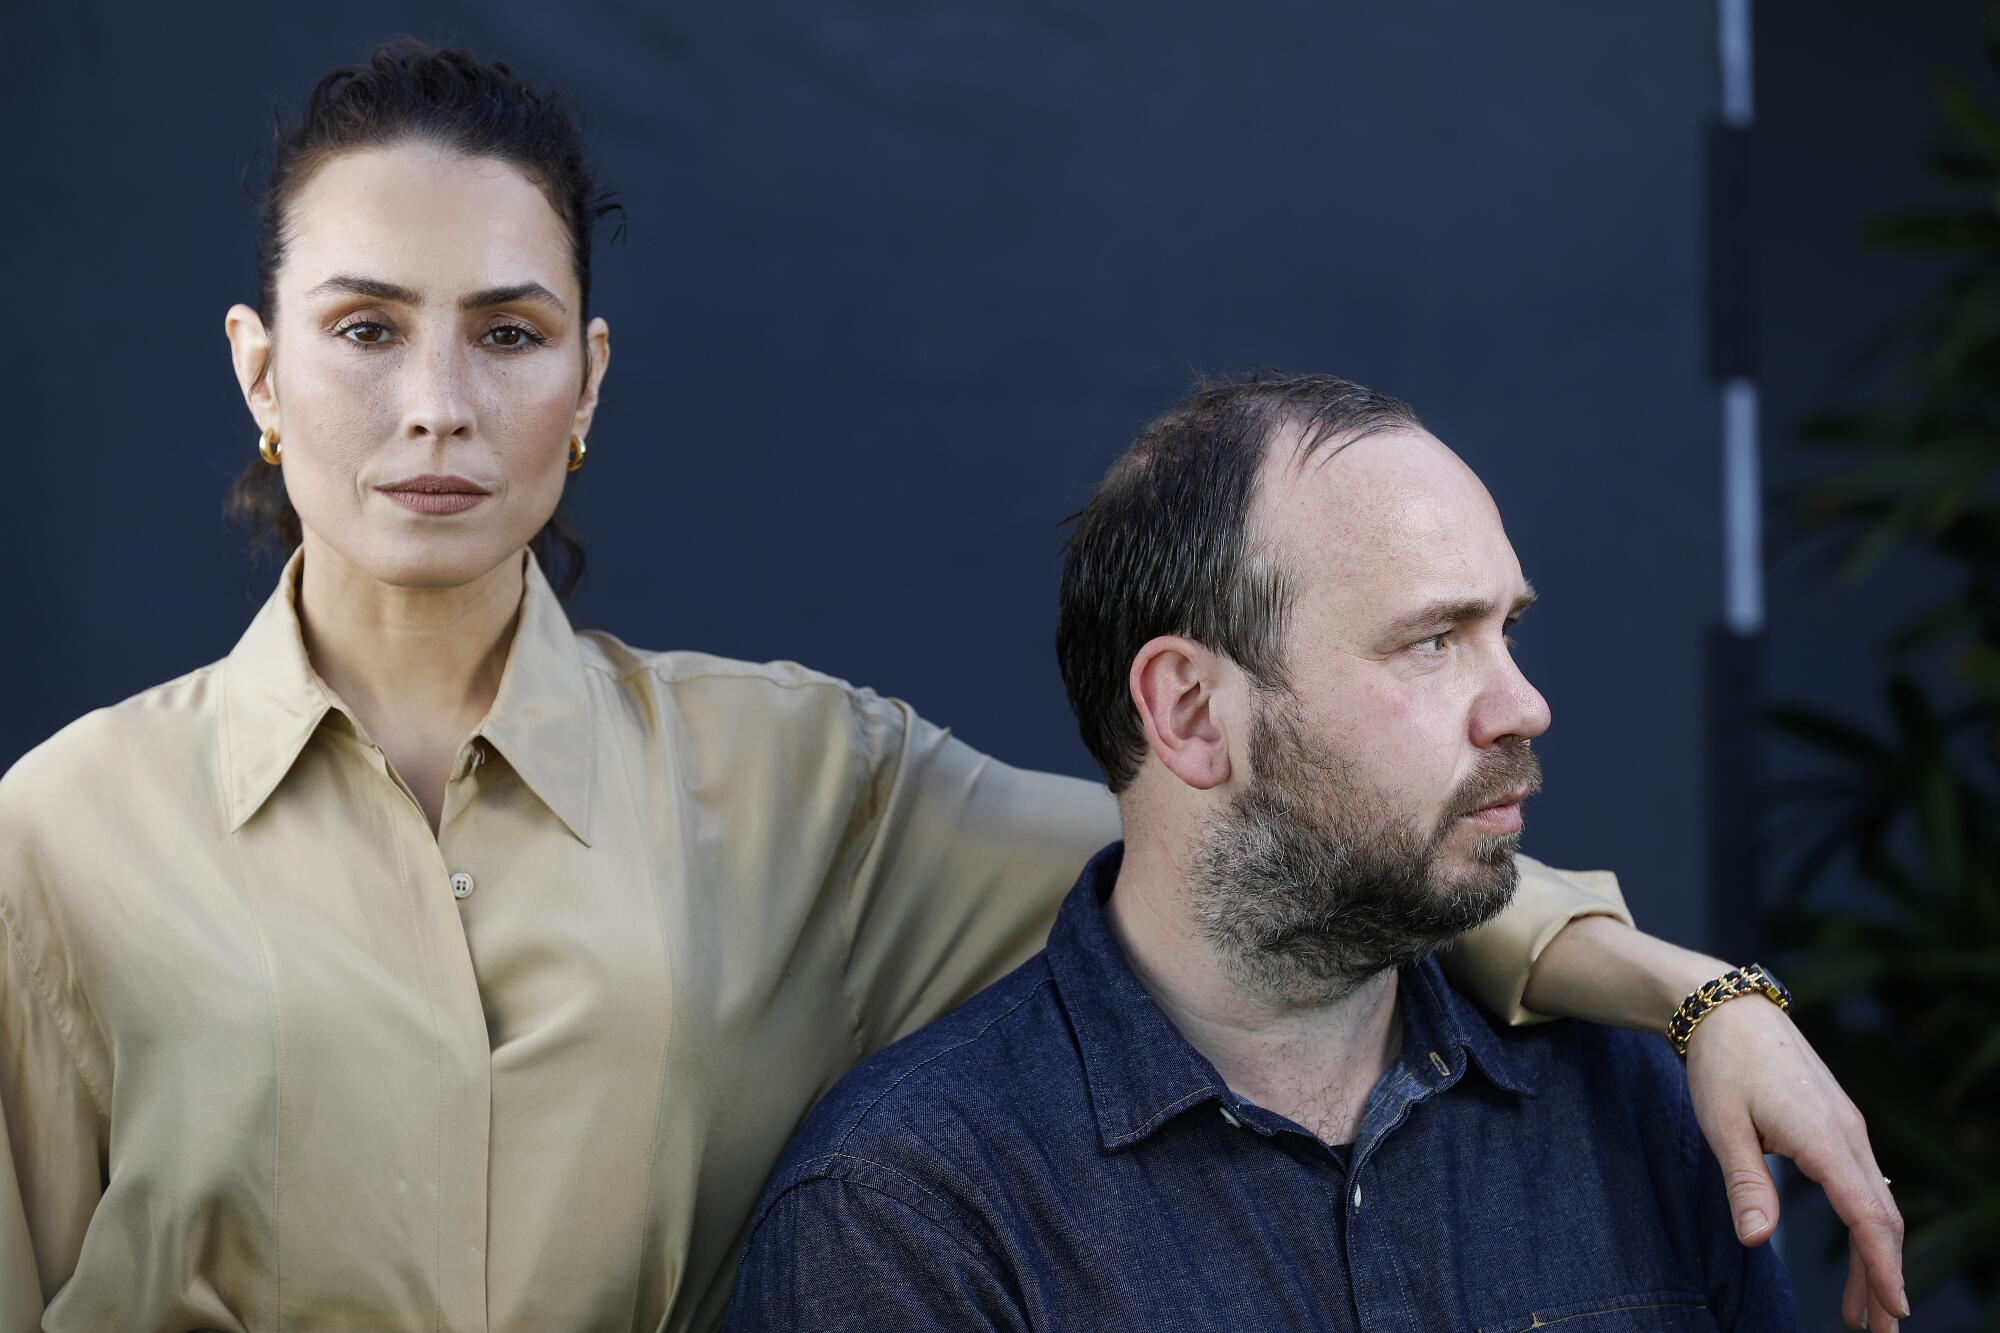 Noomi Rapace drapes her arm over the shoulder of director Valdimar Johannsson